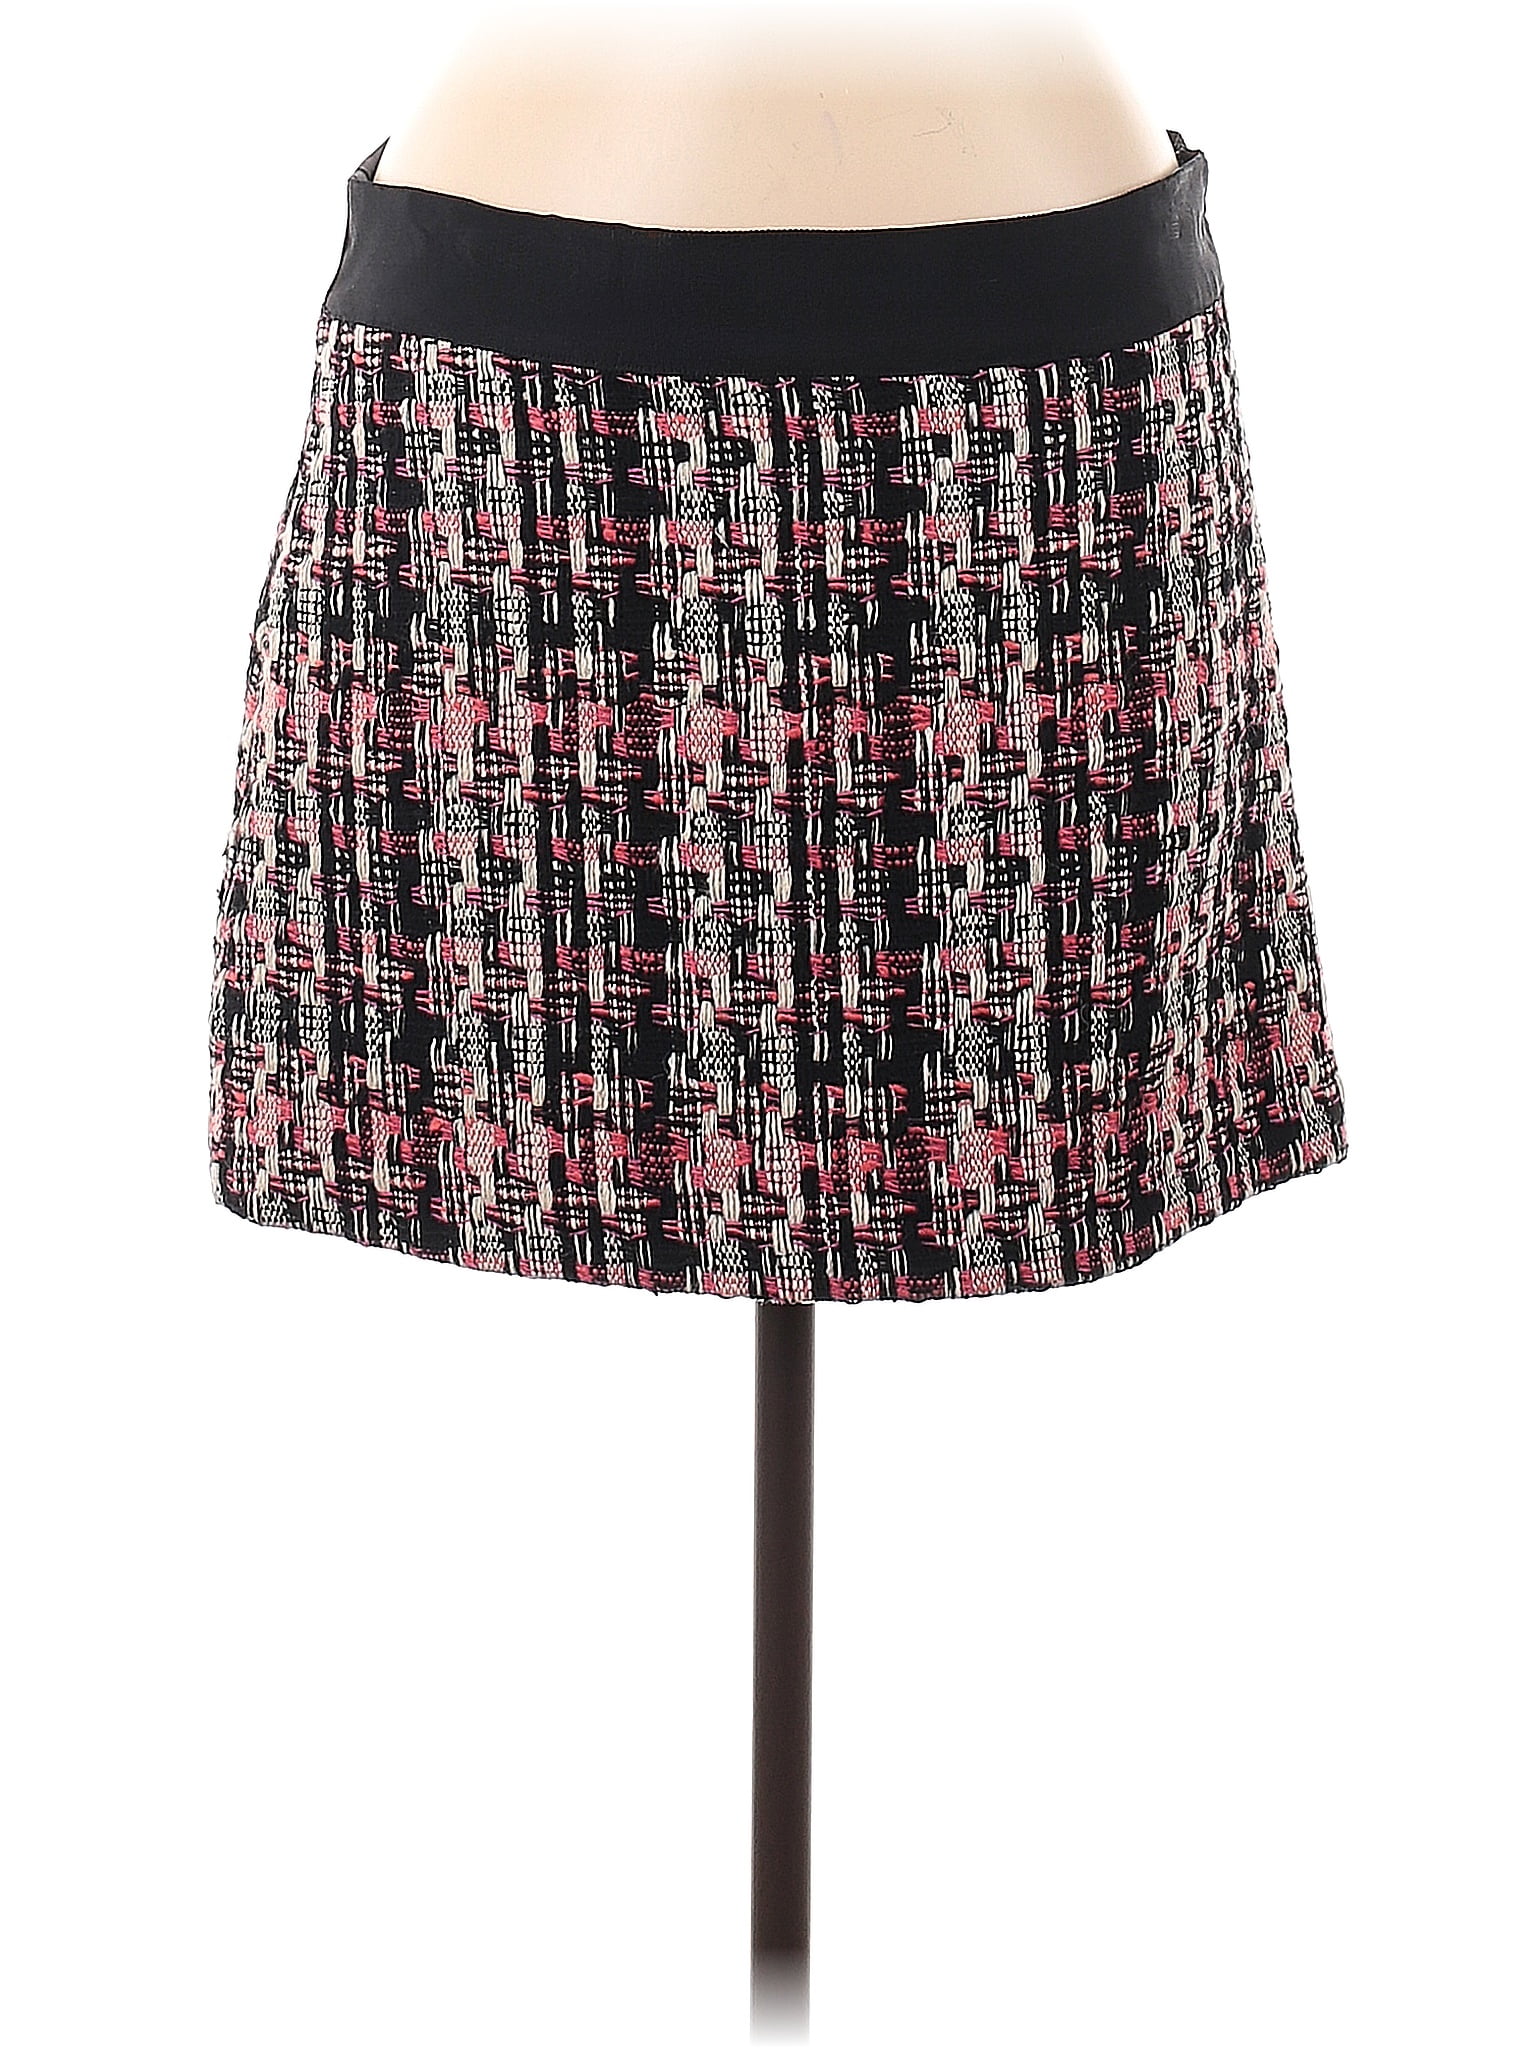 Milly 100% Wool Black Casual Skirt Size 6 - 78% off | thredUP